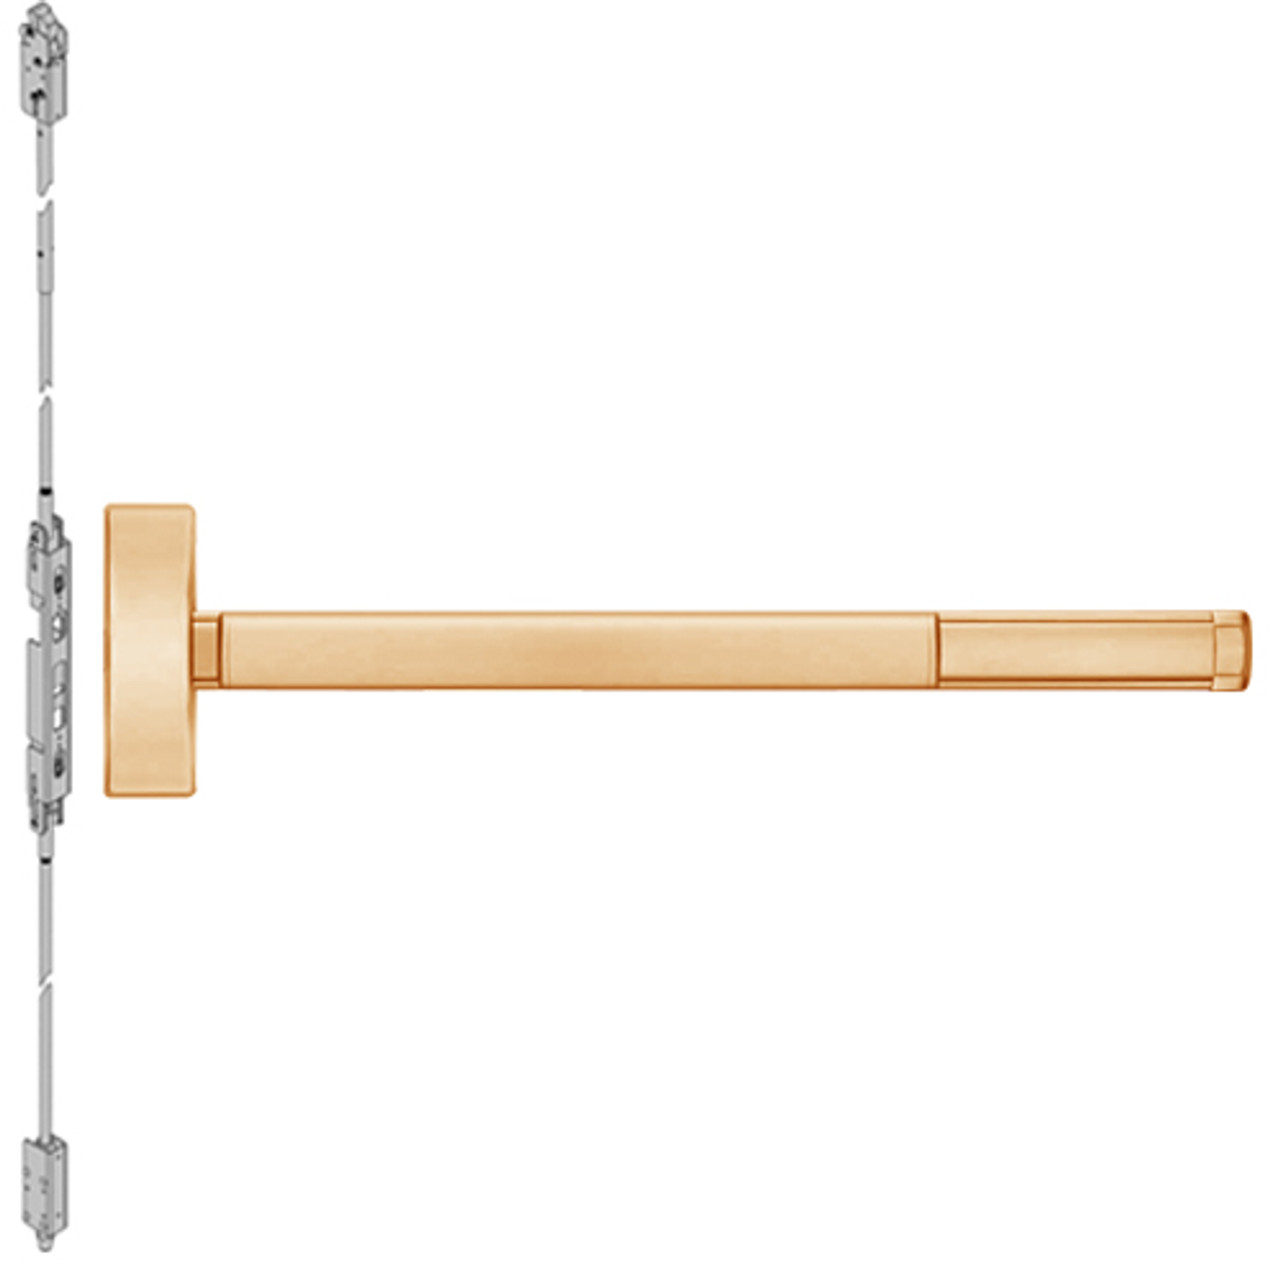 ELR2815LBR-612-48 PHI 2800 Series Concealed Vertical Rod Exit Device with Electric Latch Retraction Prepped for Thumbpiece Always Active in Satin Bronze Finish